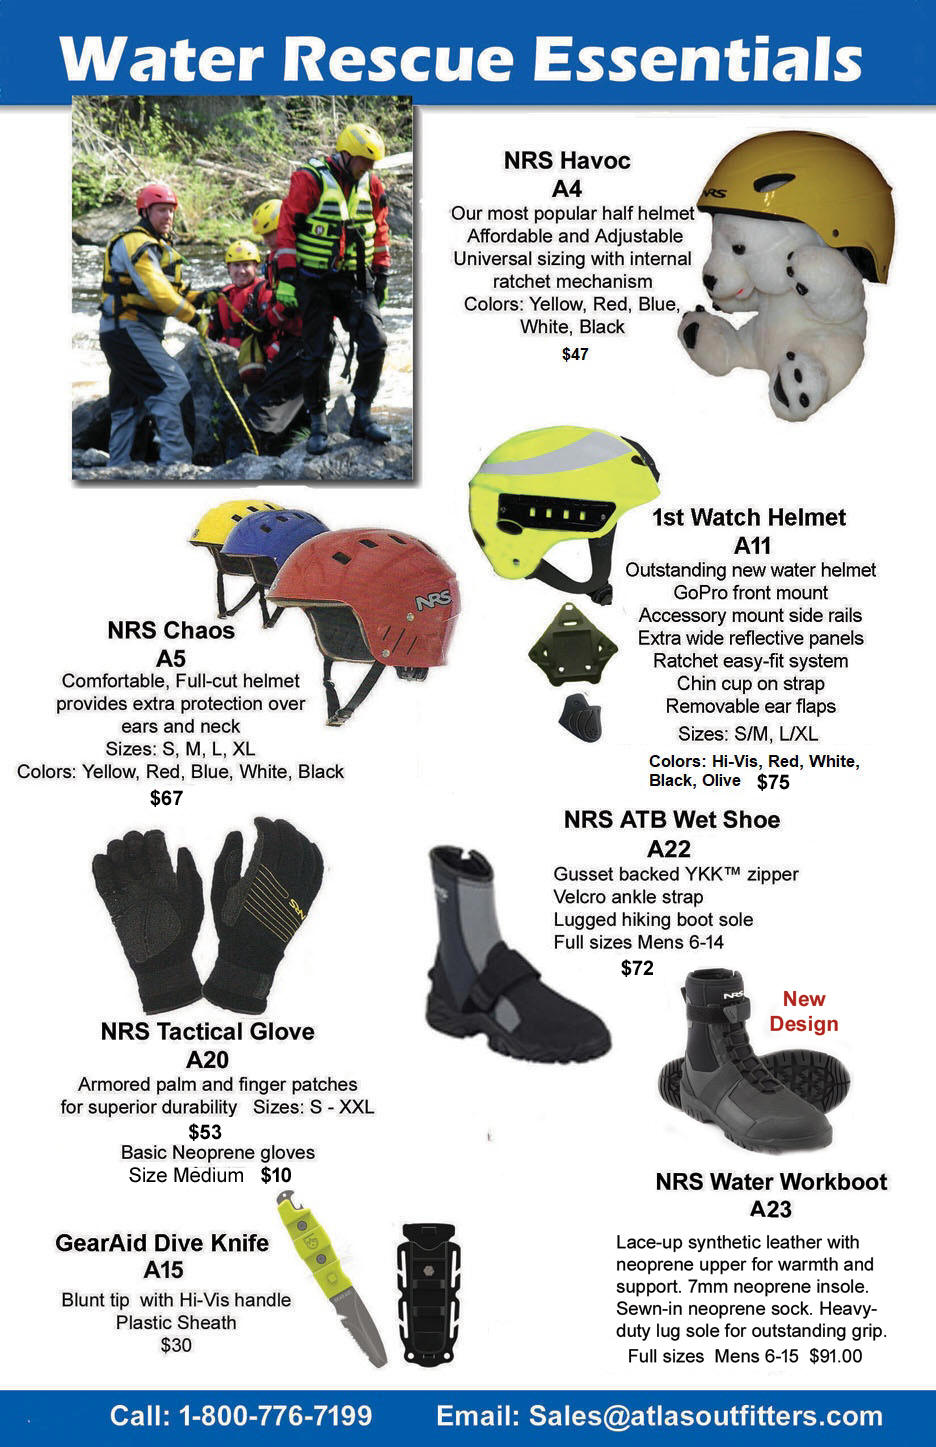 Water rescue helmets and boots